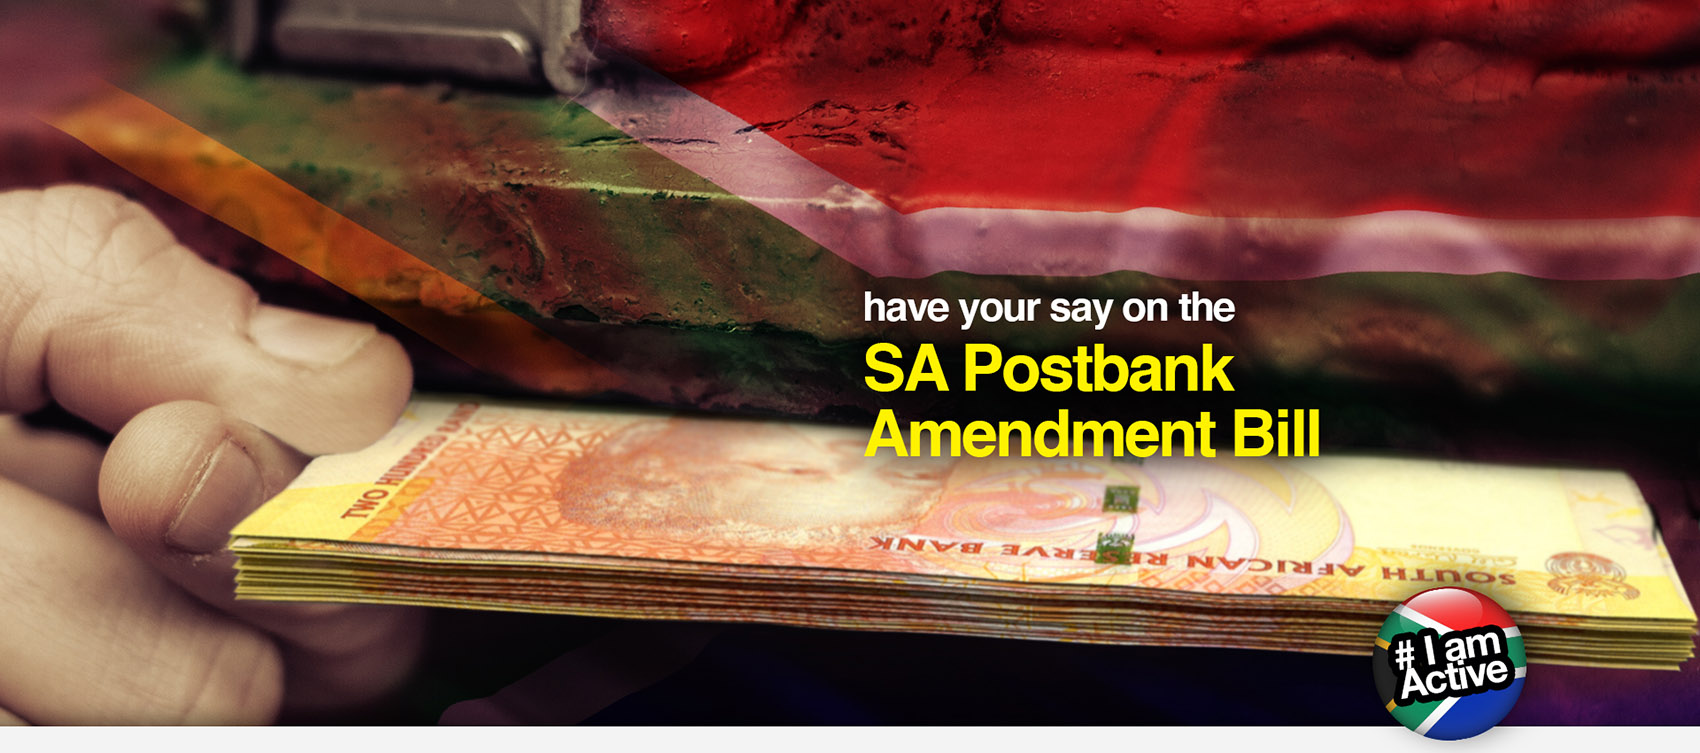 Comment on the proposed state-owned bank DearSA postbank